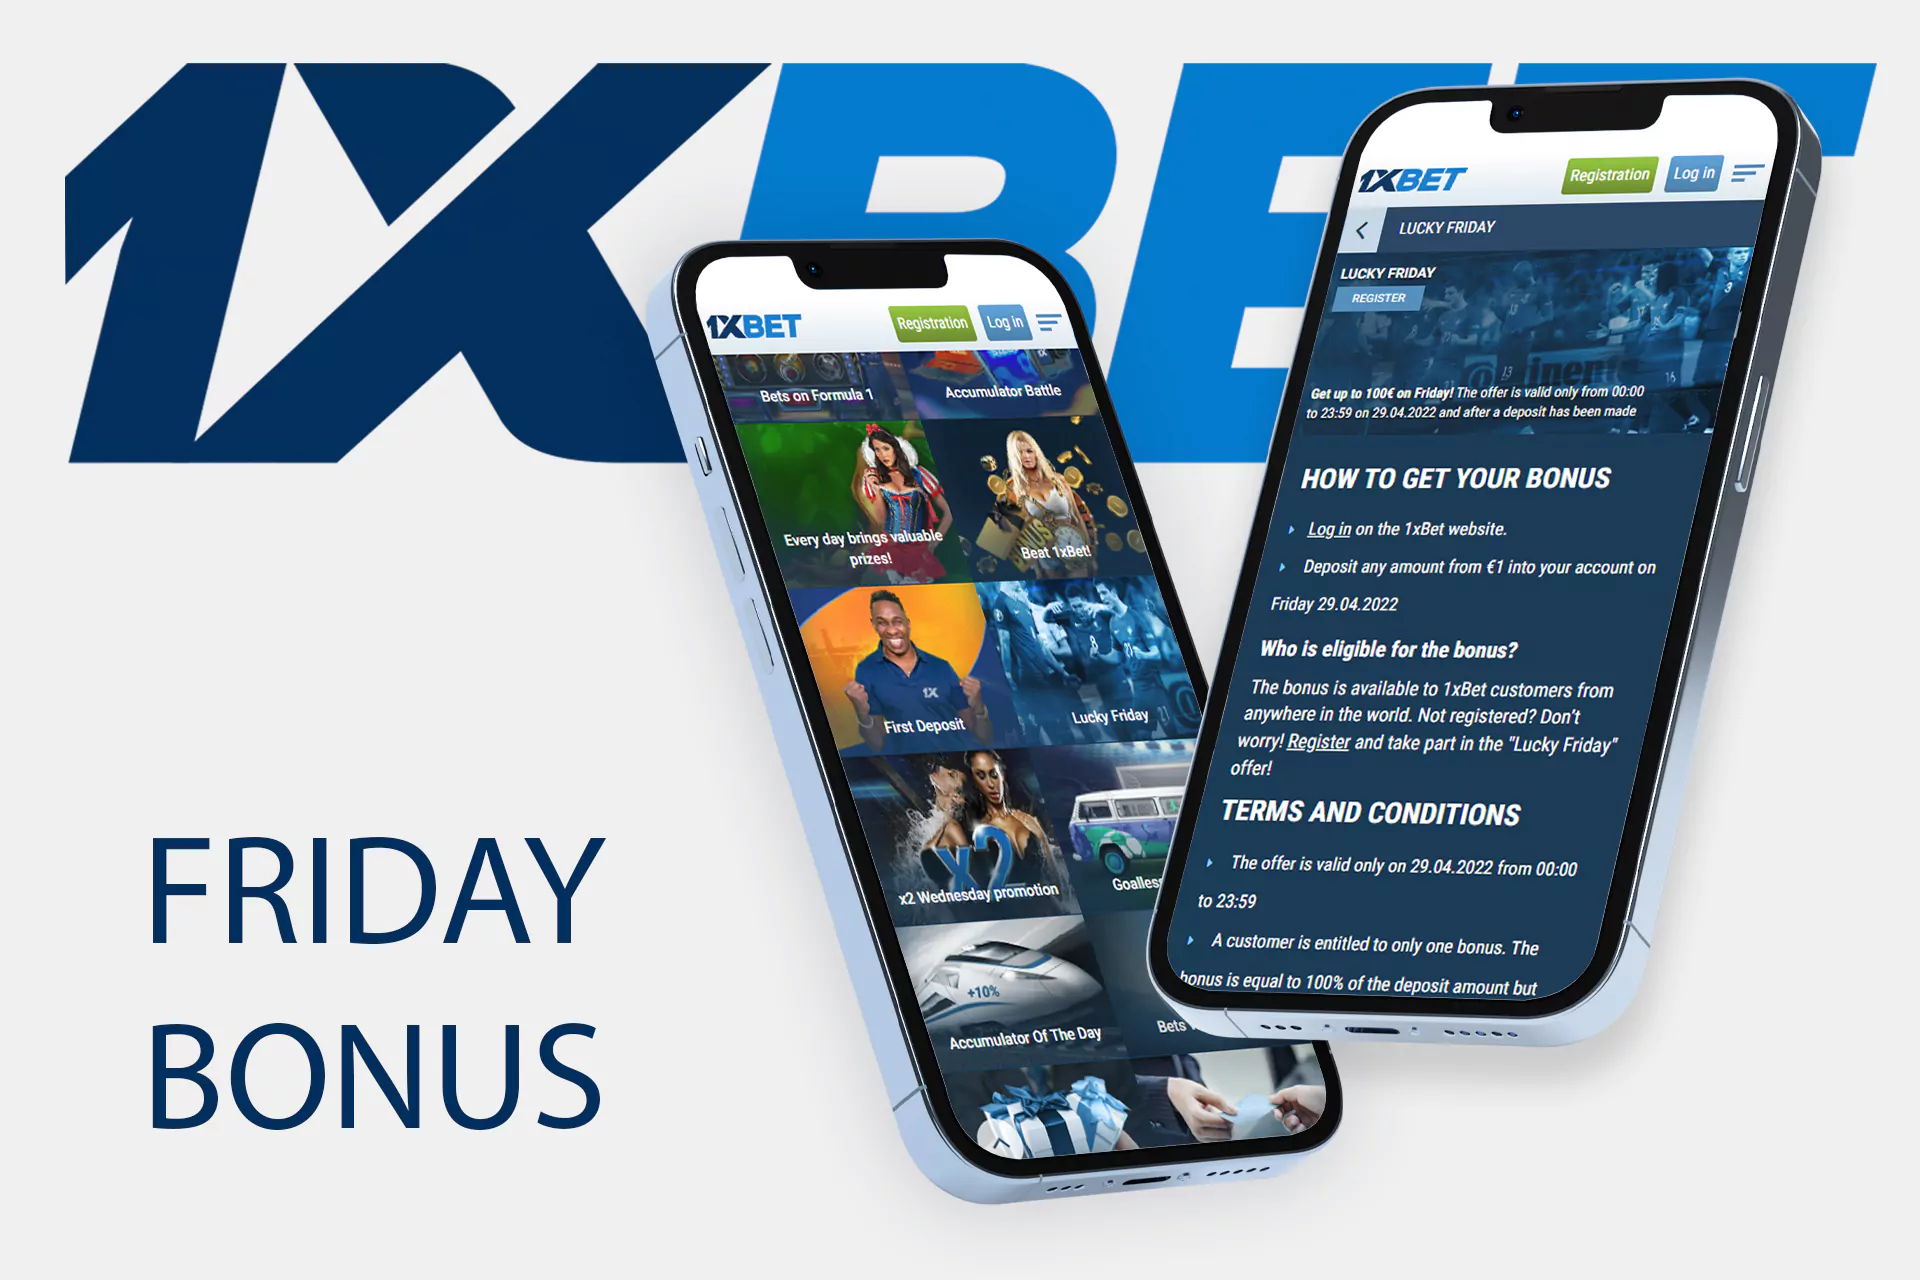 Bonuses available in the 1xbet app